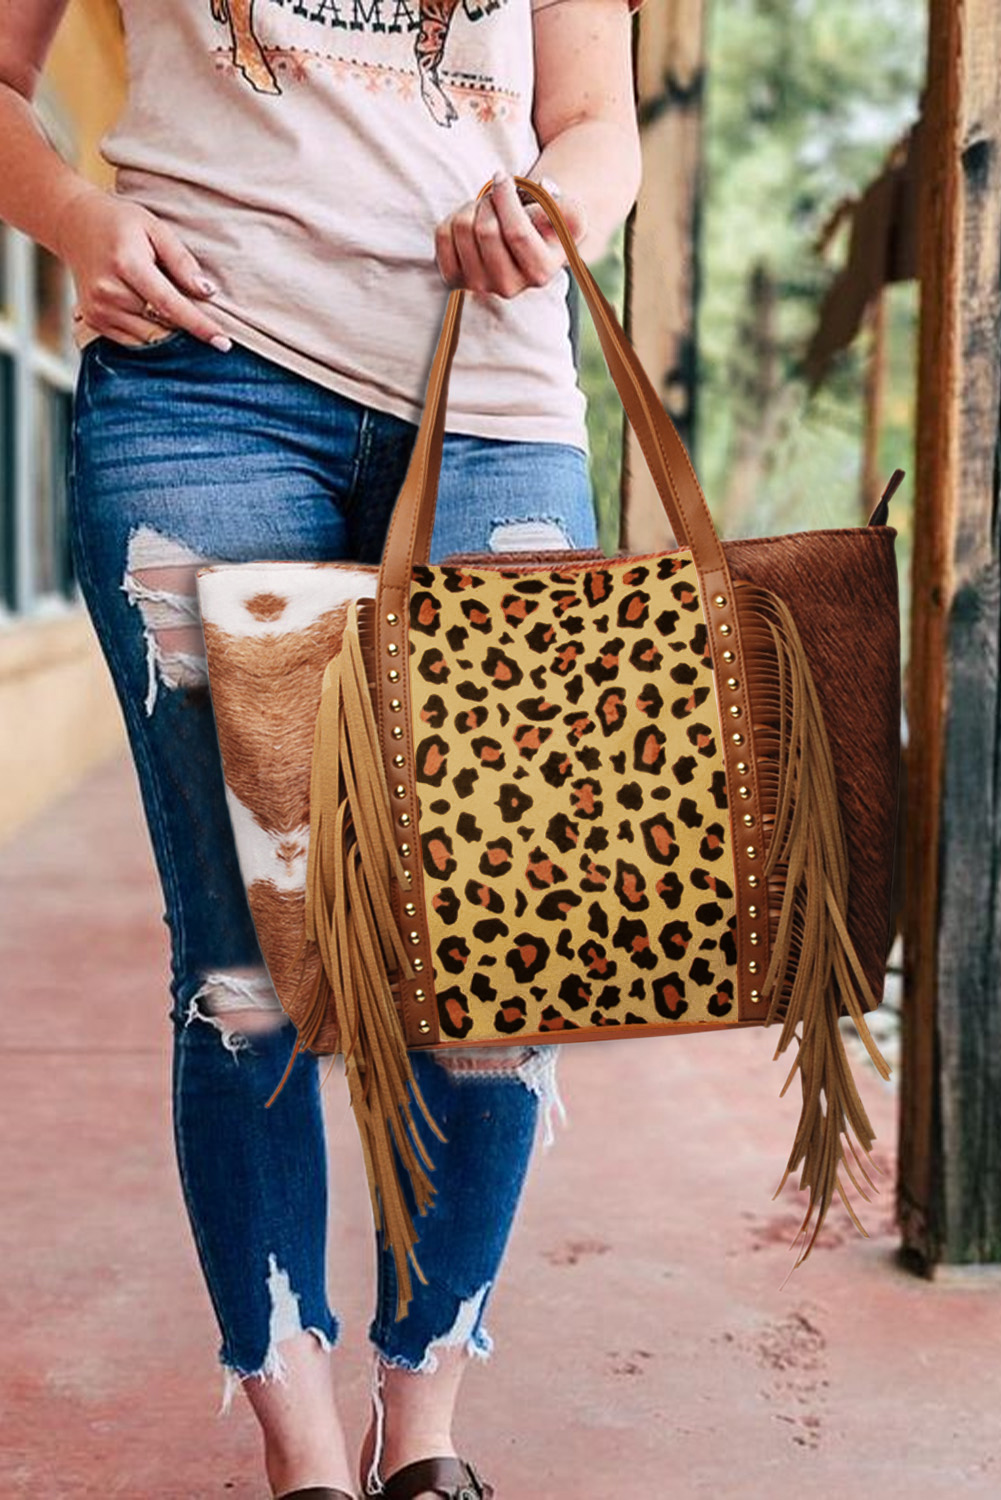 Wholesale Cheetah and Animal Print Fring and Studded TOTE BAG 